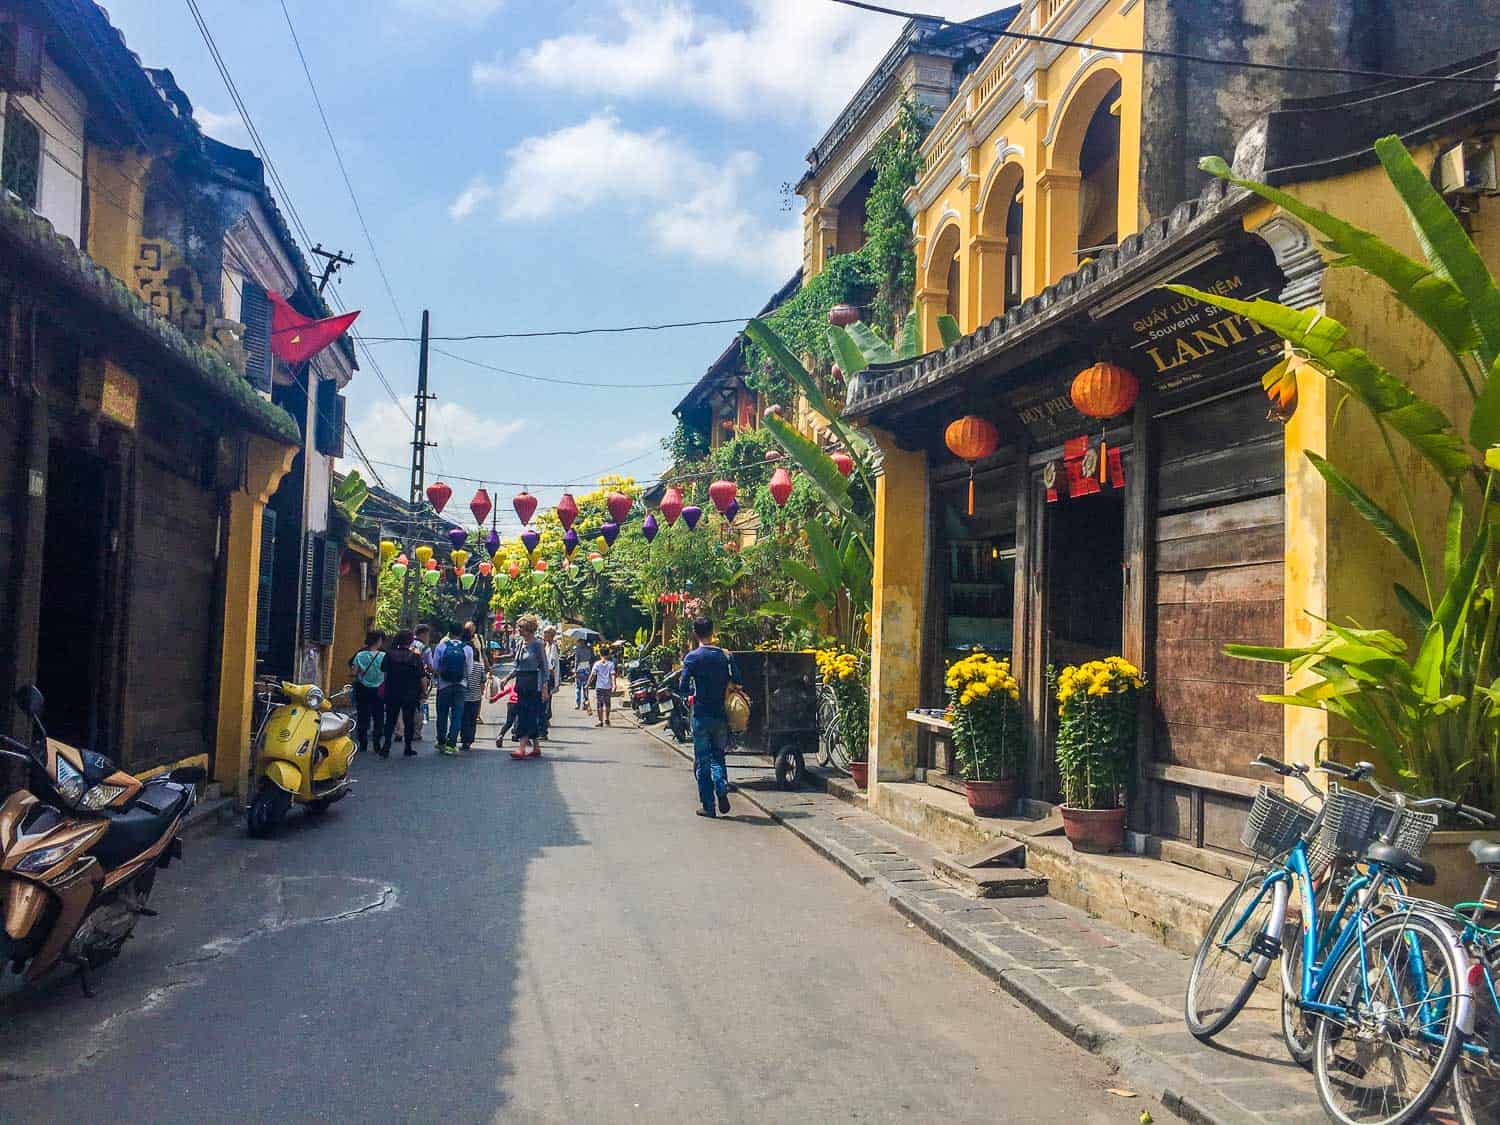 Hoi An ancient town: A digital nomad guide